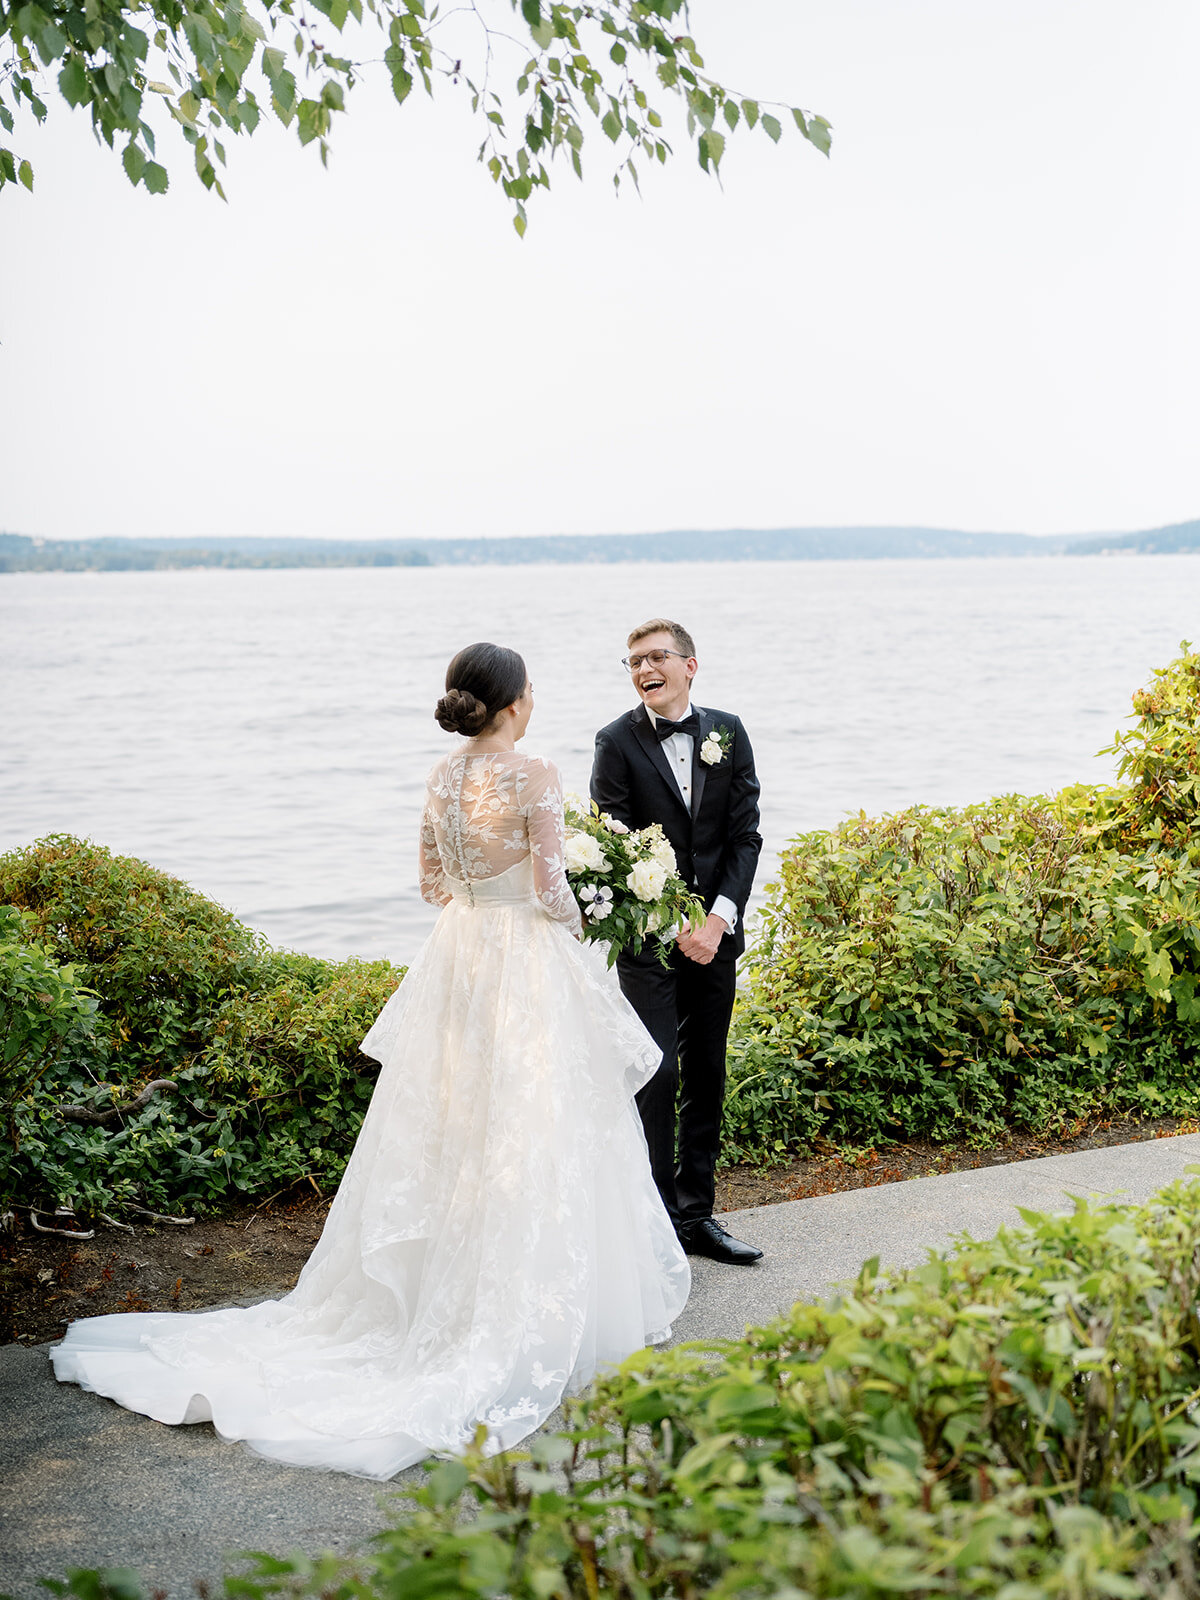 Woodmark-hotel-and-still-spa-wedding-first-look-photos-groom-reaction-pacific-engagements-wedding-planning-seattle-wedding-photographer-anna-peters-photography